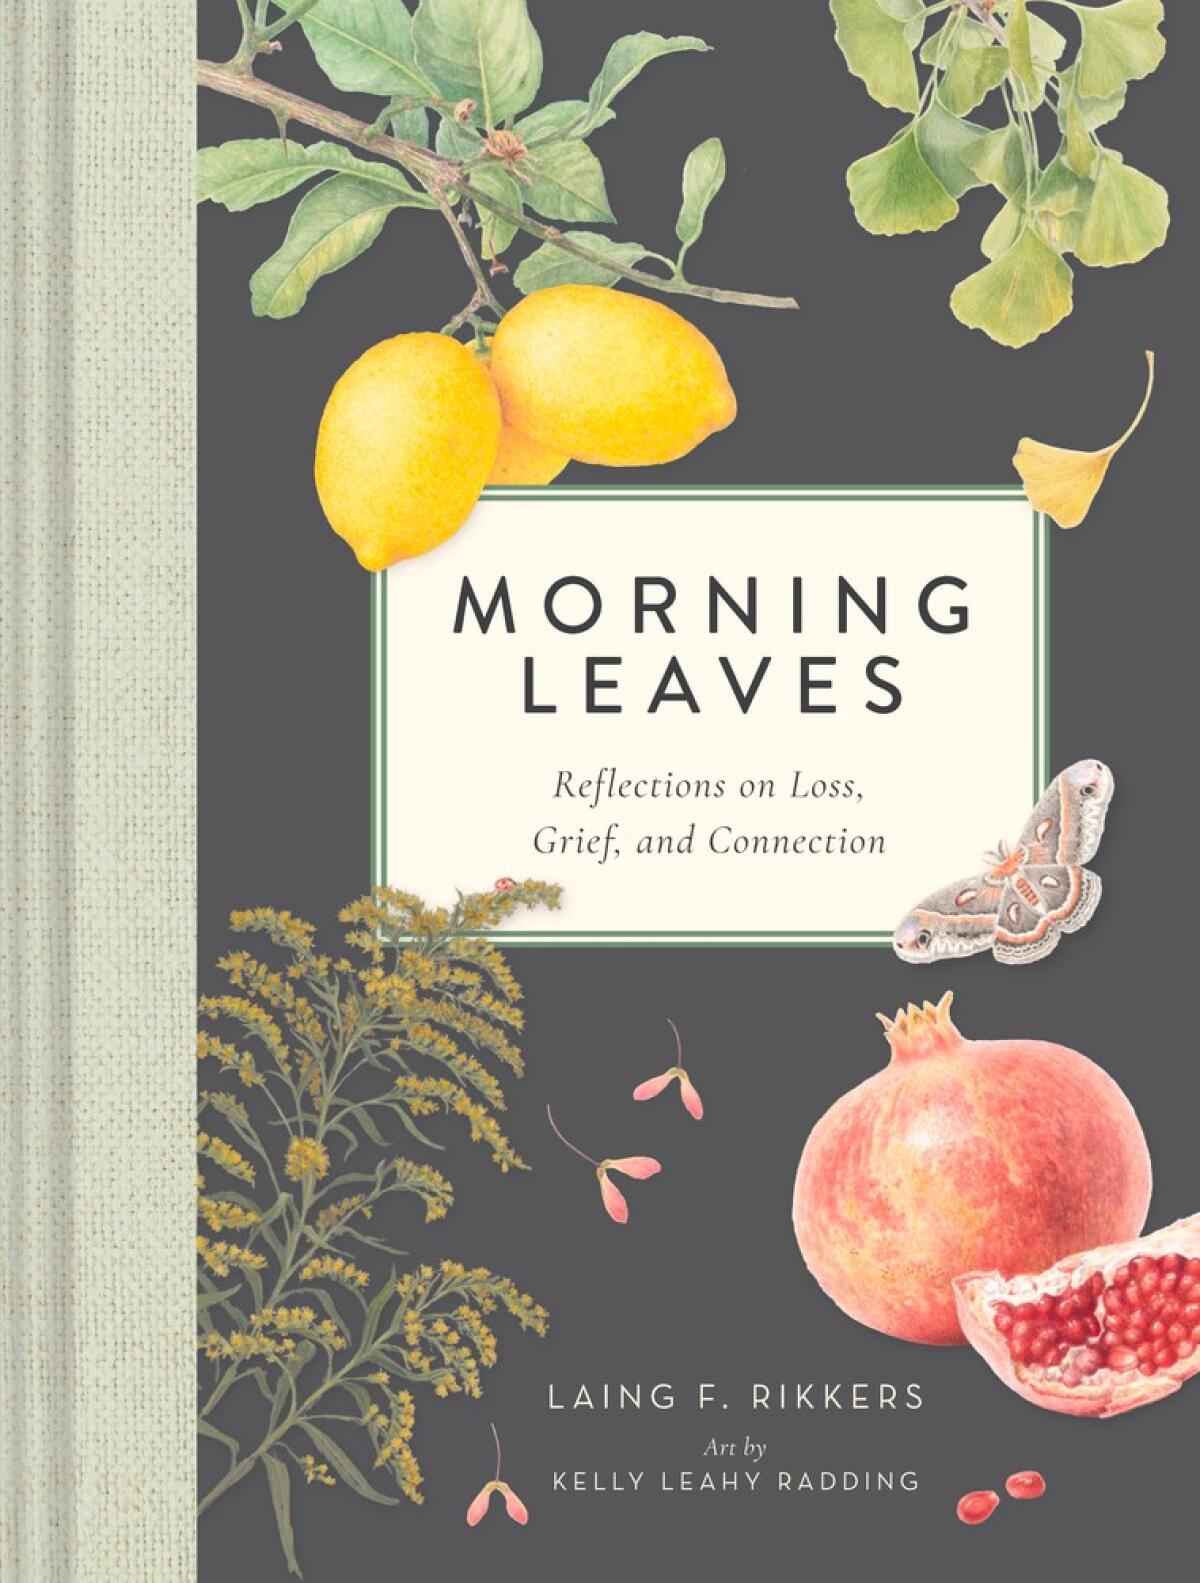 "Morning Leaves" was released in May.